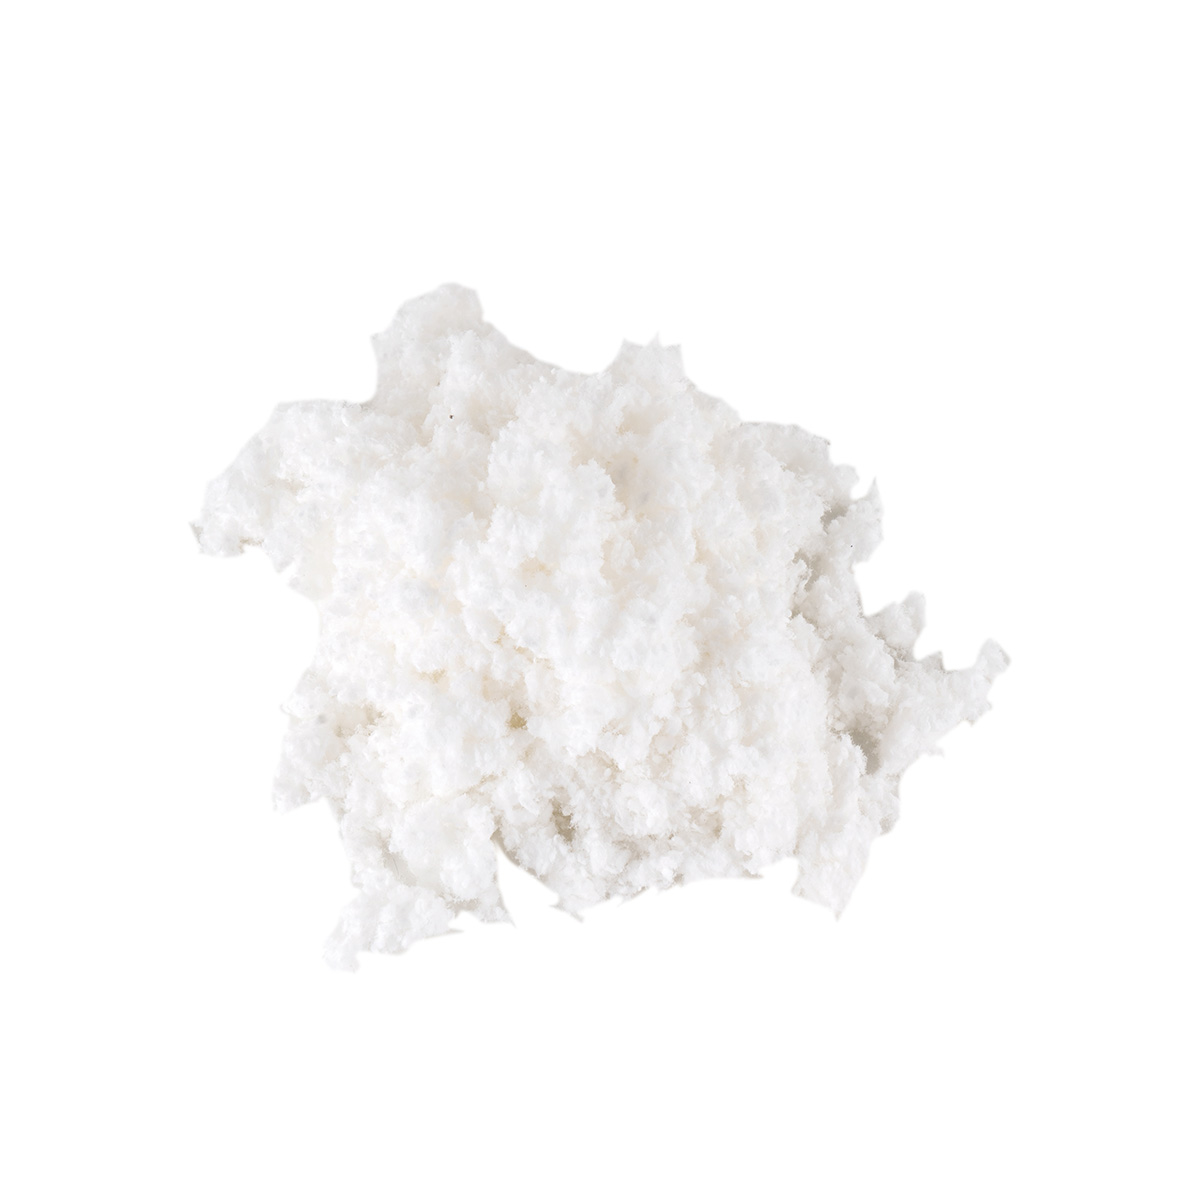 L Grade Nitrocellulose with IPA or Enthanol 